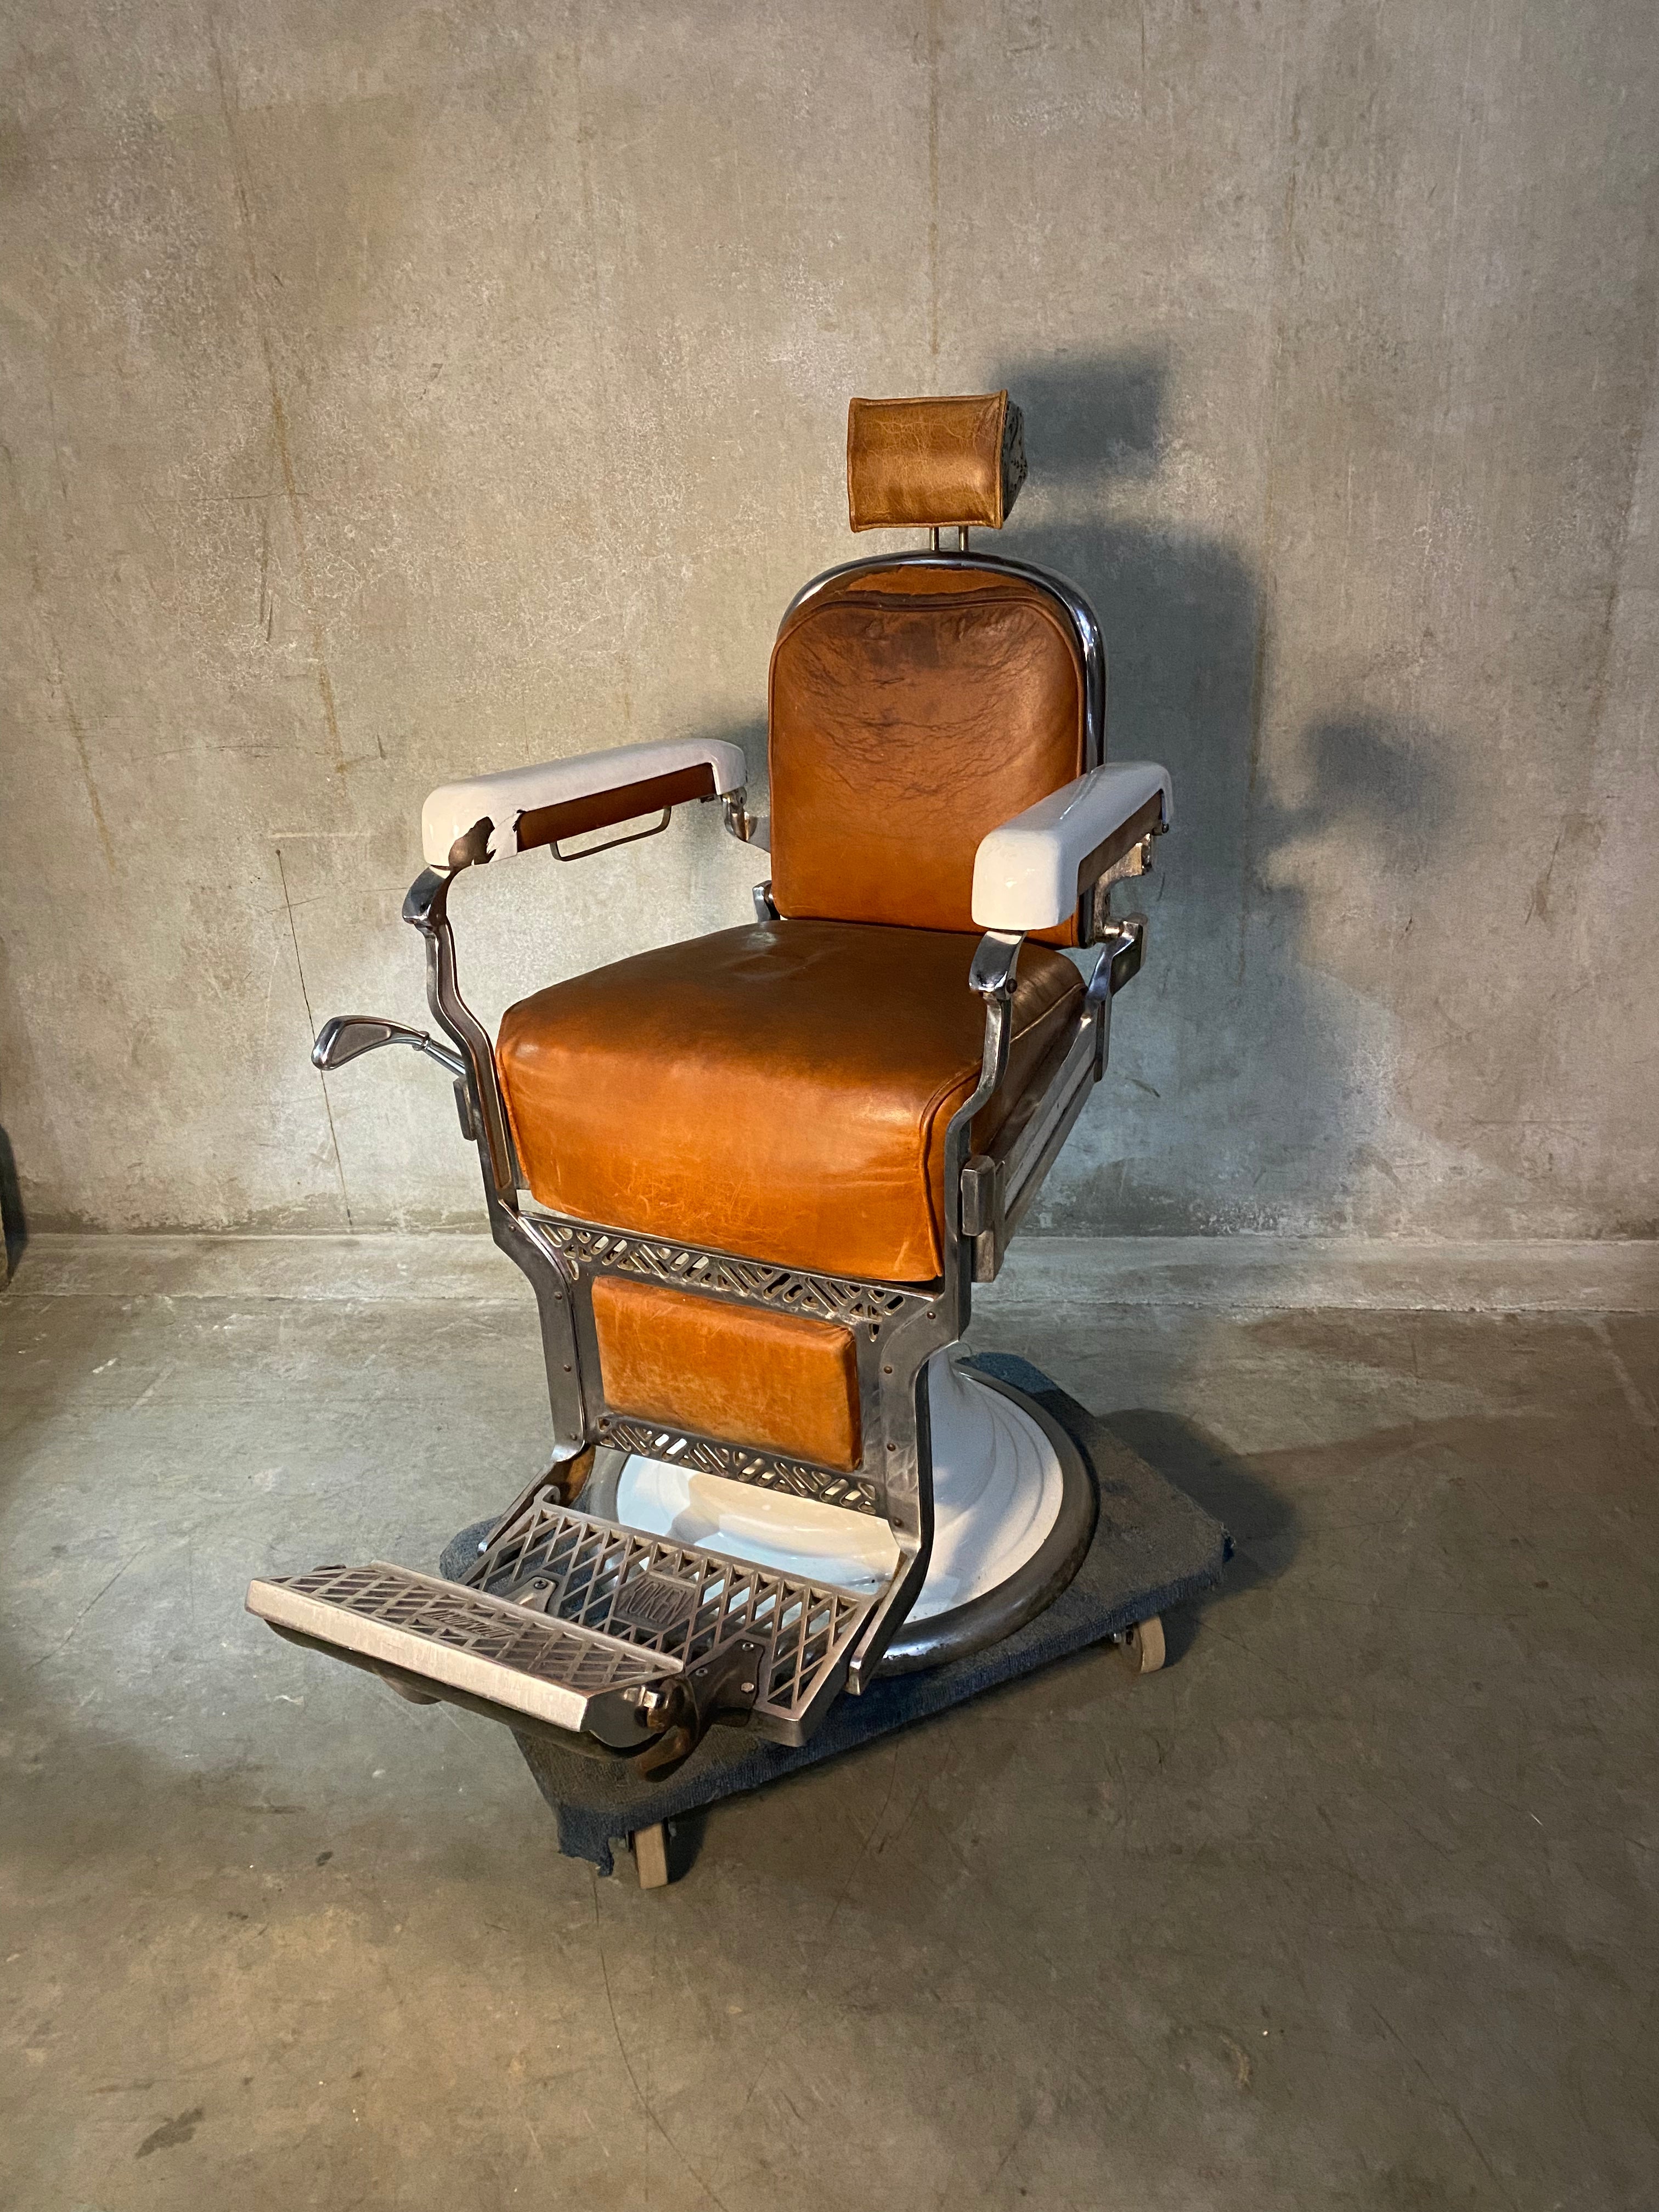 Koken first generation Porcelain barber chair  in old Leather | Scott Landon Antiques and Interiors.